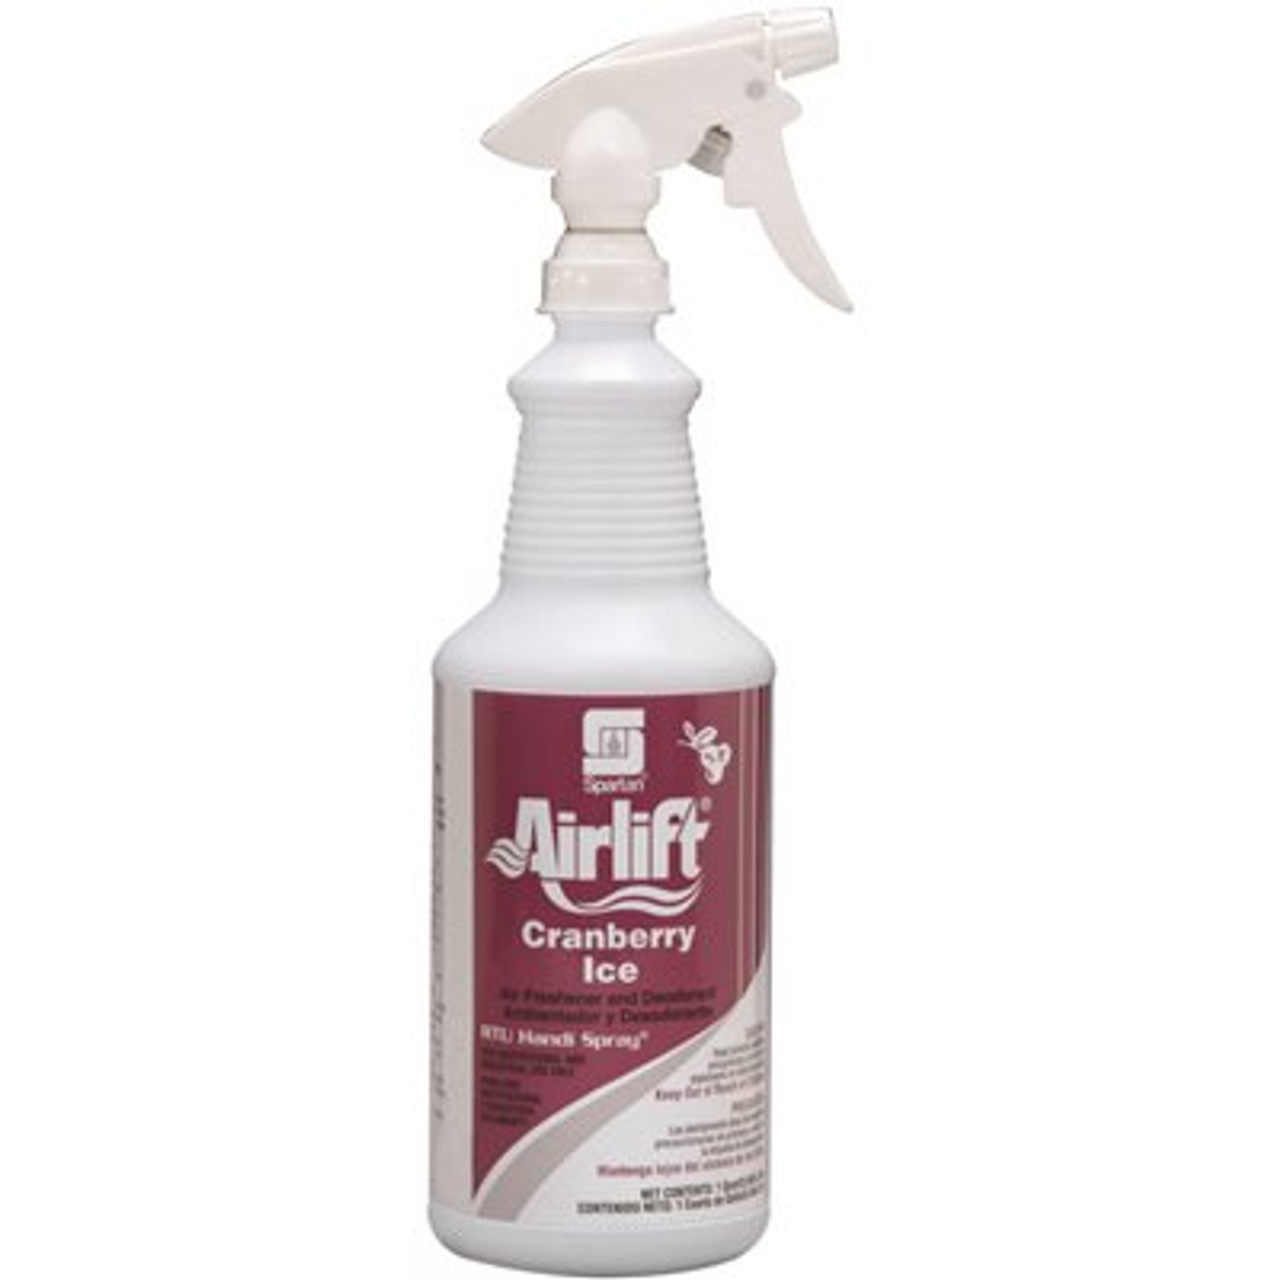 Spartan Chemical Co. Airlift Cranberry Ice 1 Quart Air Freshener